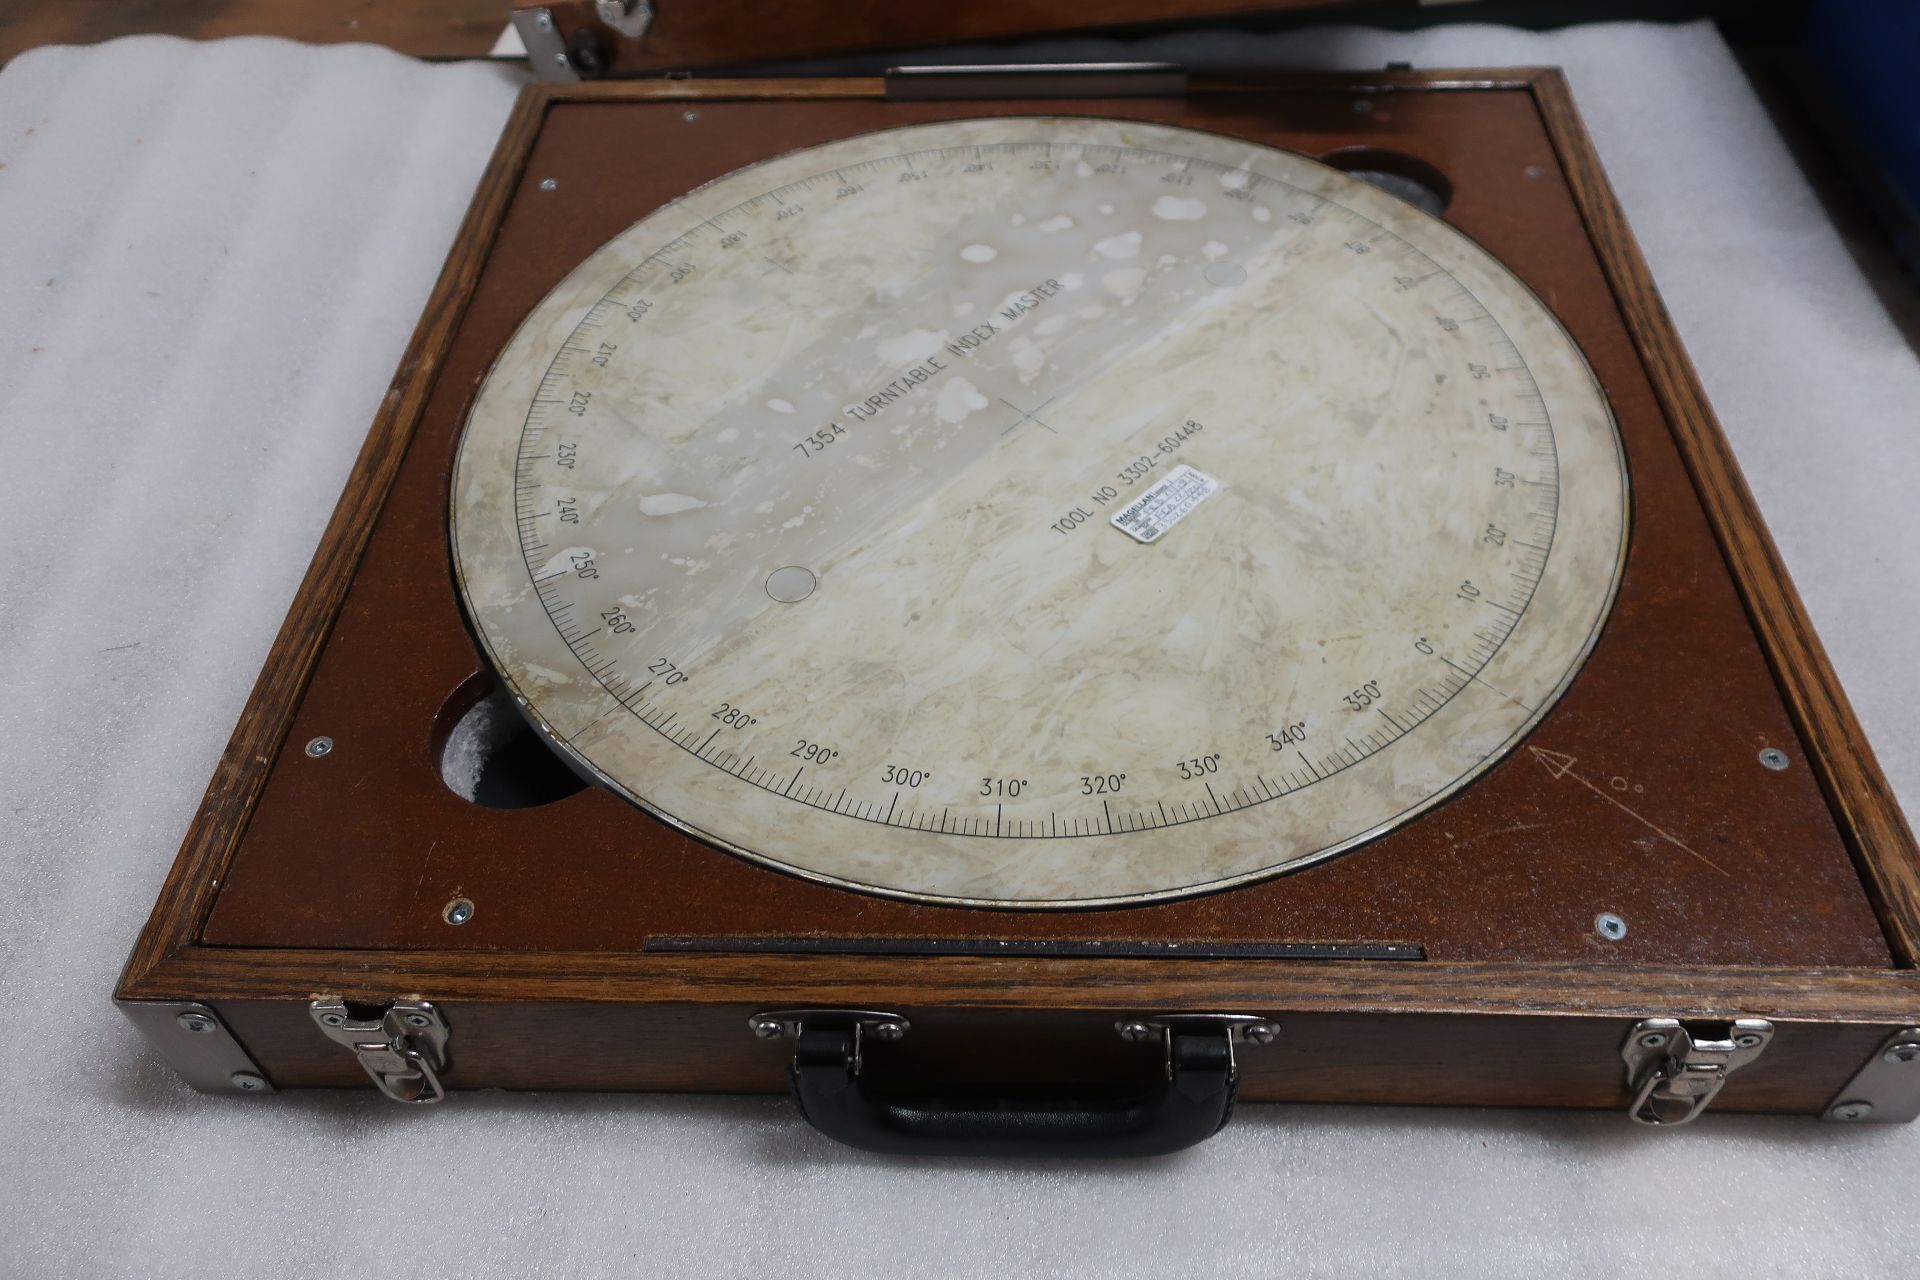 Angle Measurement Unit with Index Master Turntable Model 7354 in case